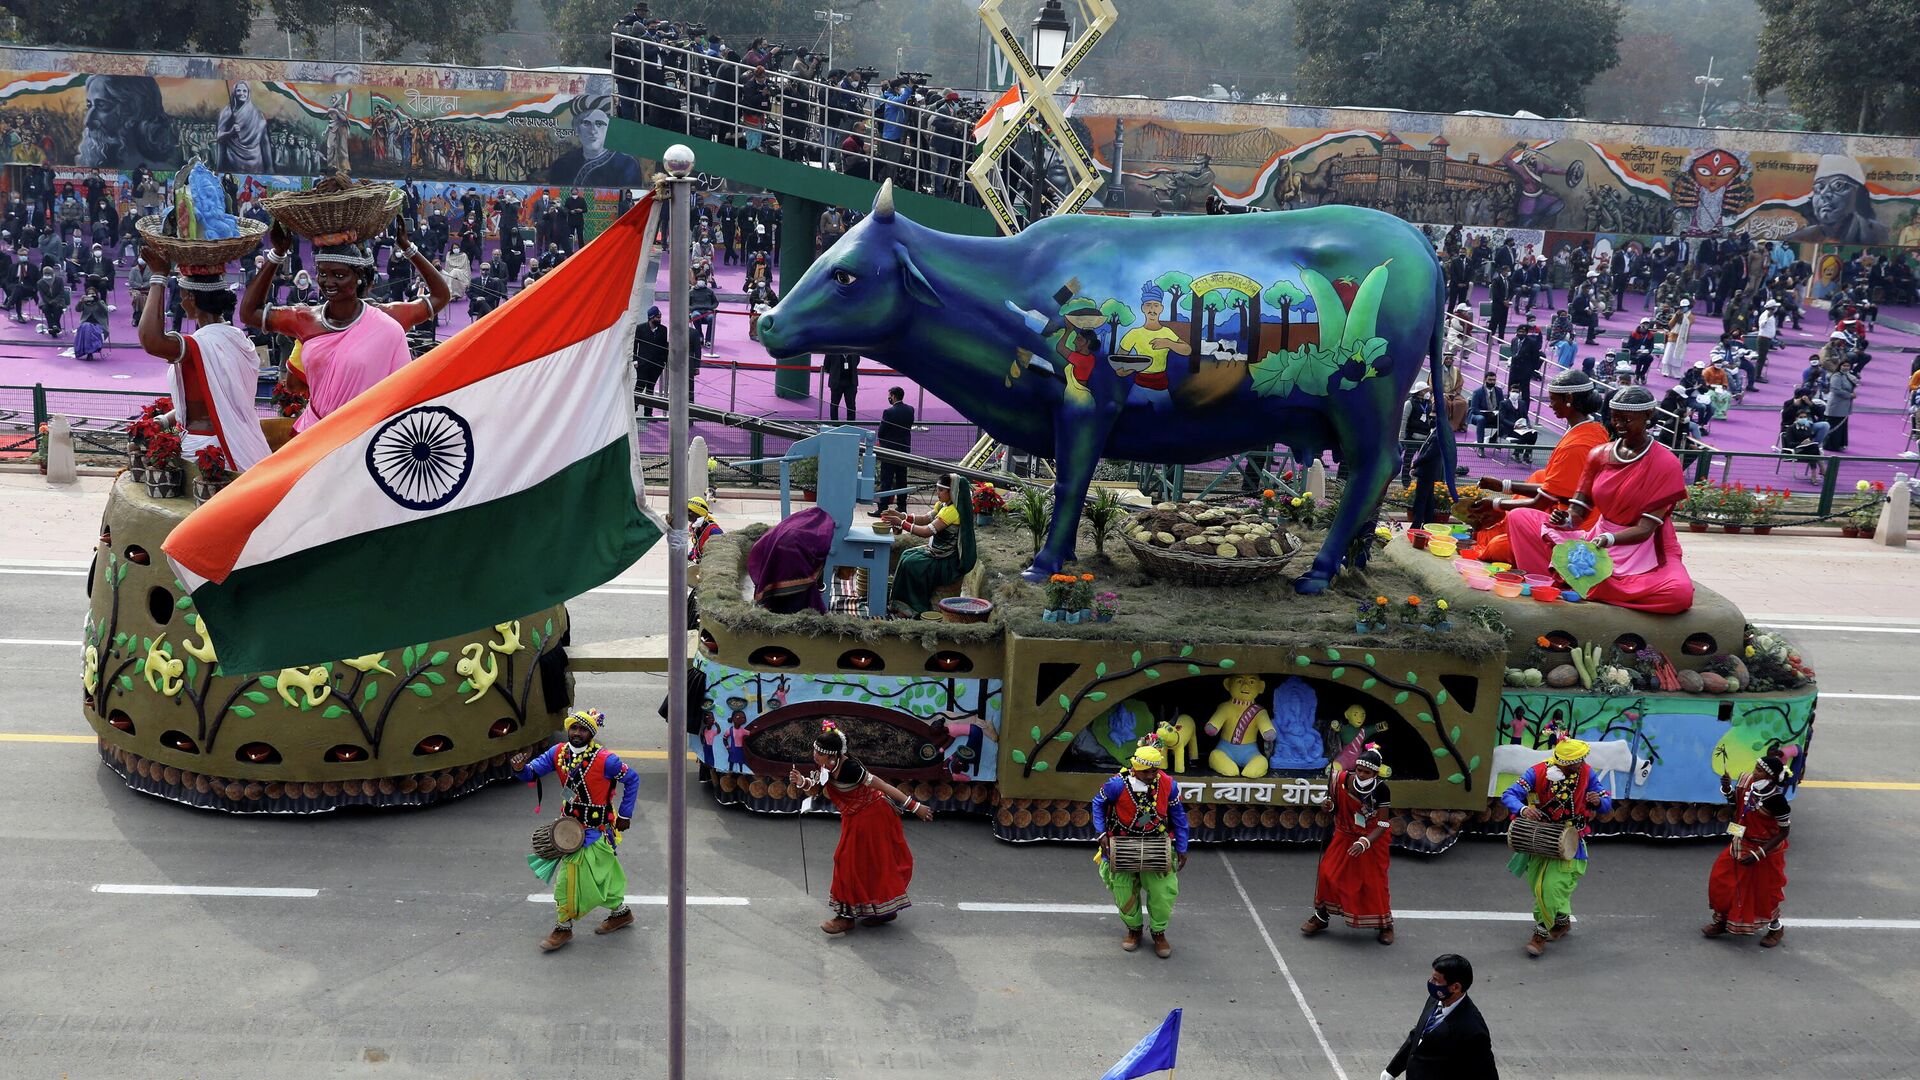 A tableau from Chhattisgarh state is displayed during the Republic Day parade in New Delhi, India, January 26, 2022 - Sputnik International, 1920, 26.01.2022